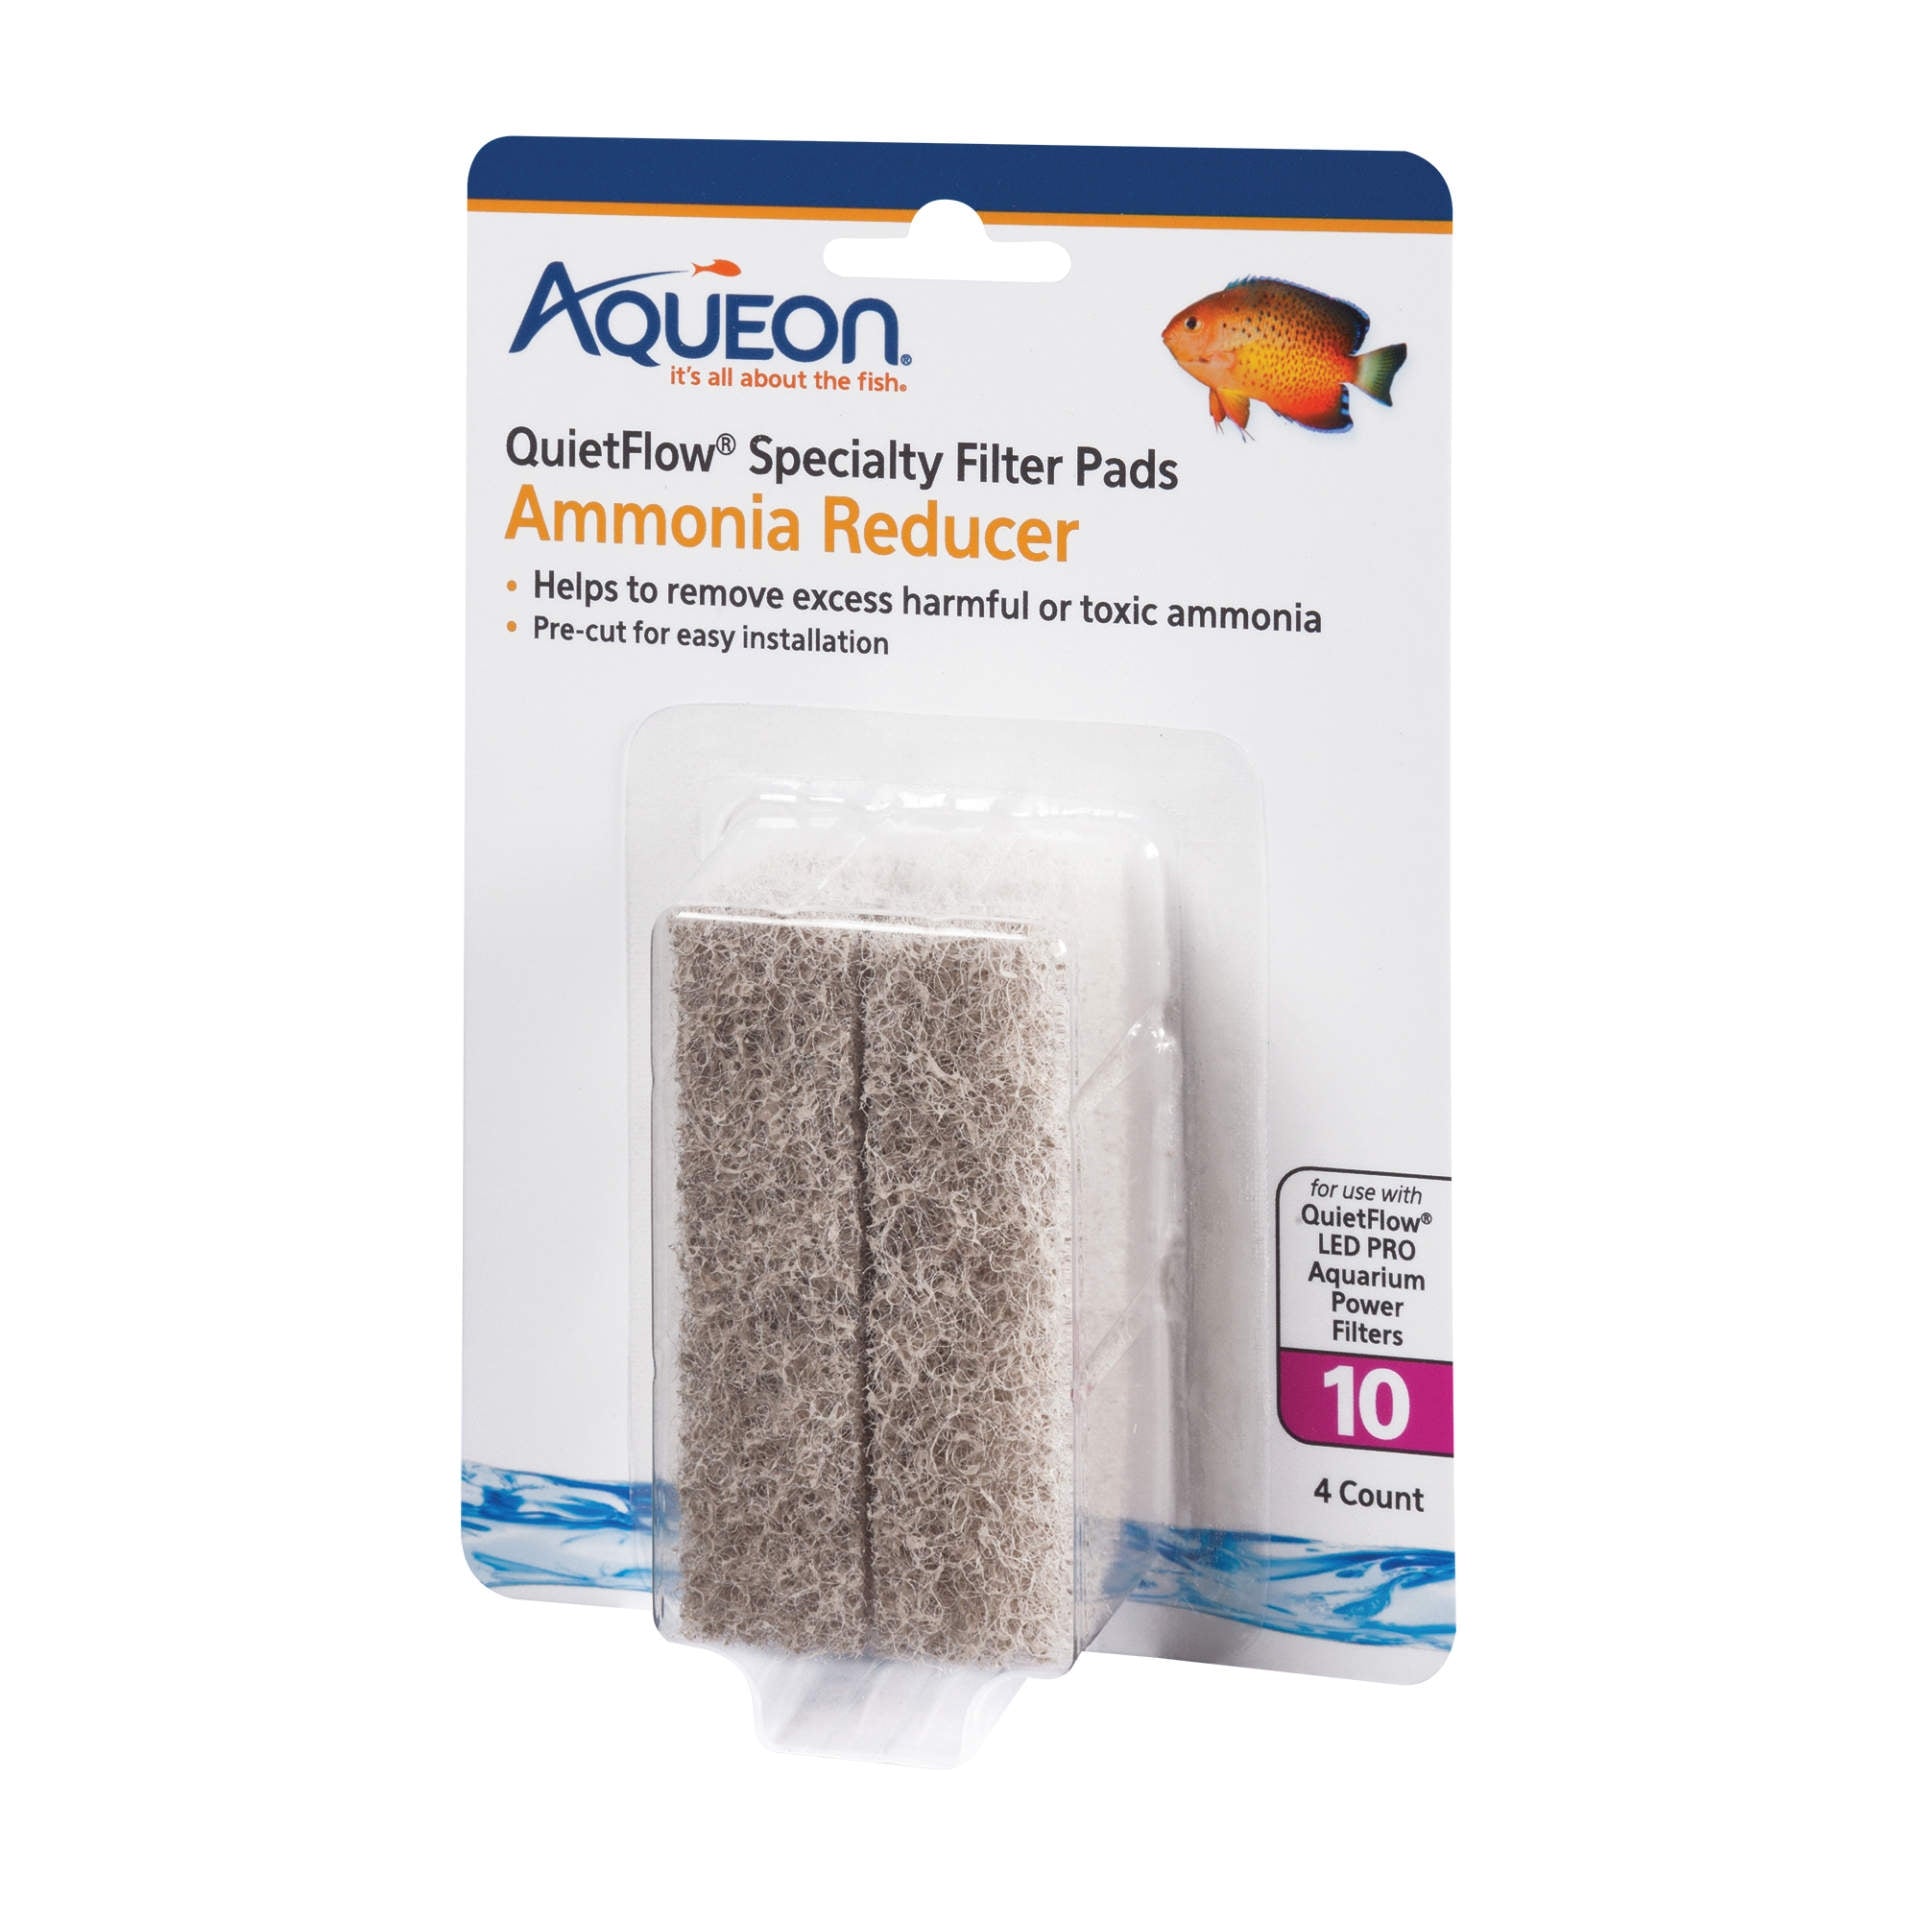 Aqueon Specialty Filter Pads Ammonia Reducer 10